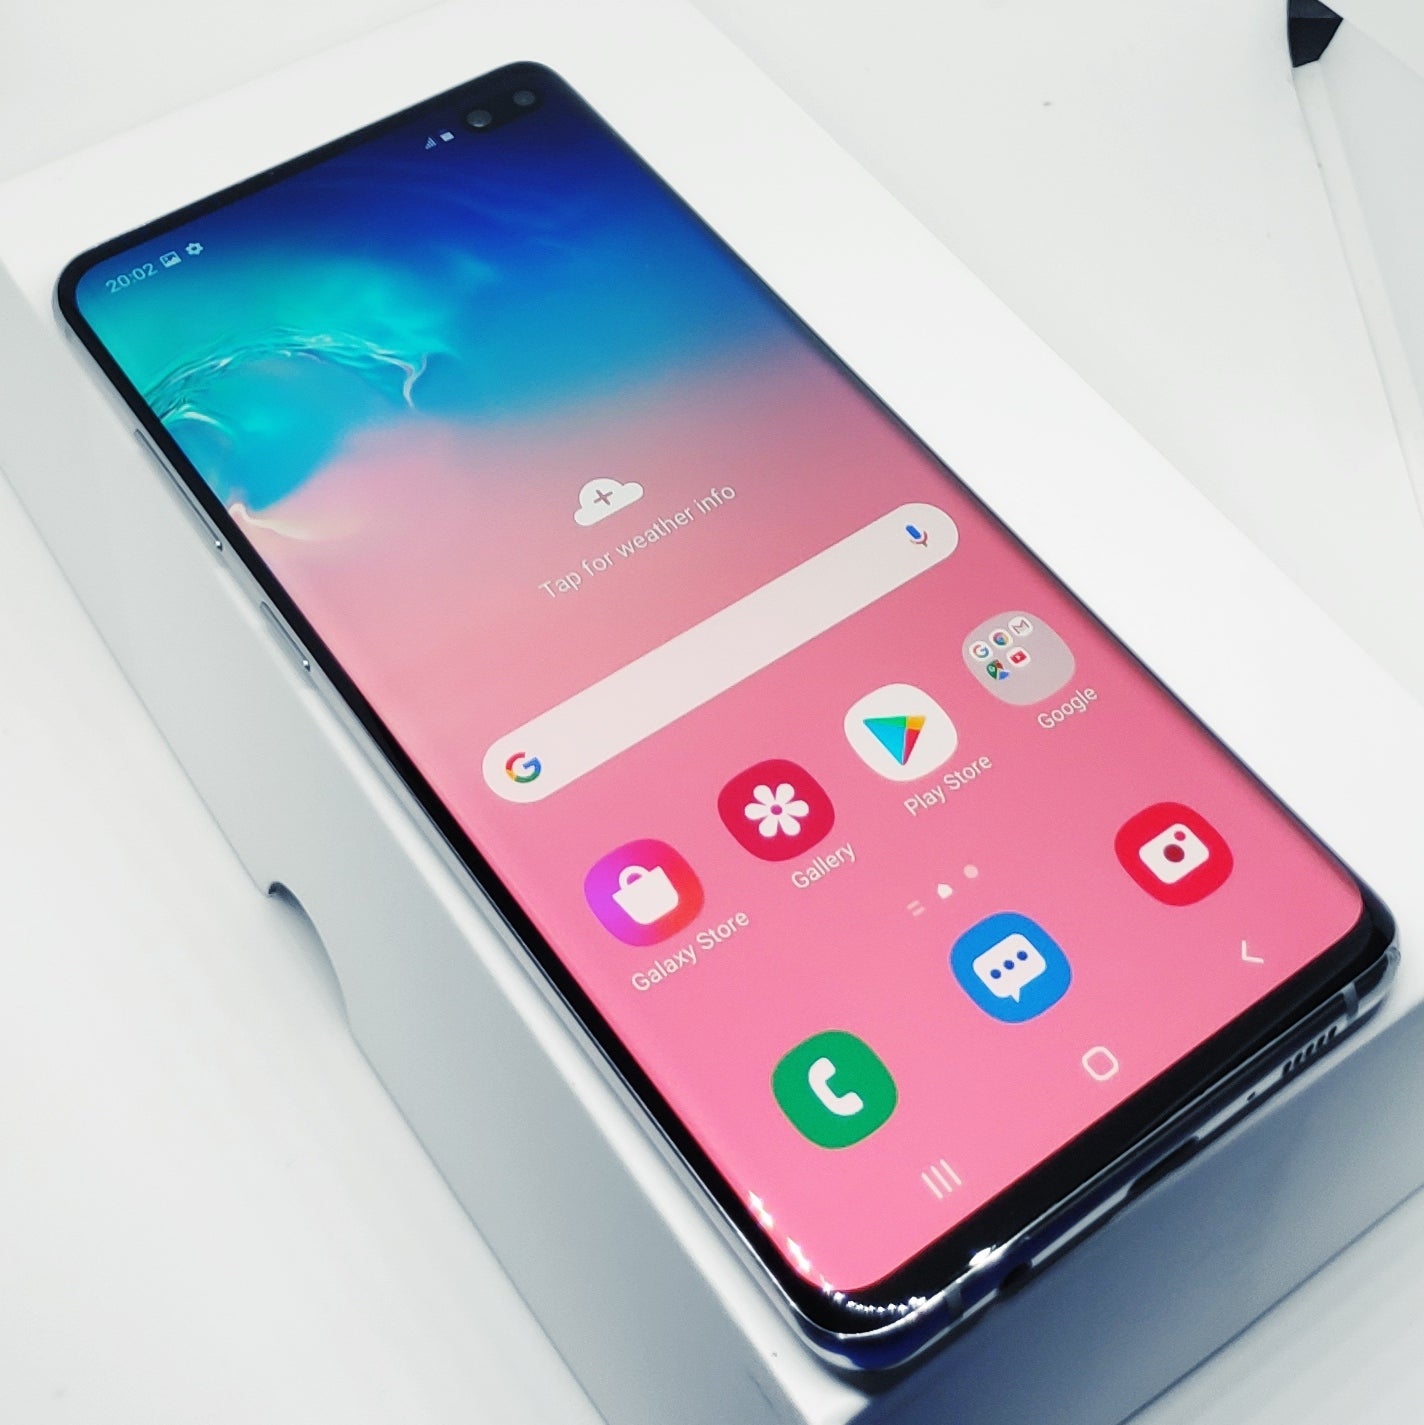 Samsung Galaxy S10 Plus Blue 128GB With New Case, Glass Screen Protector & Shipping (Like New)